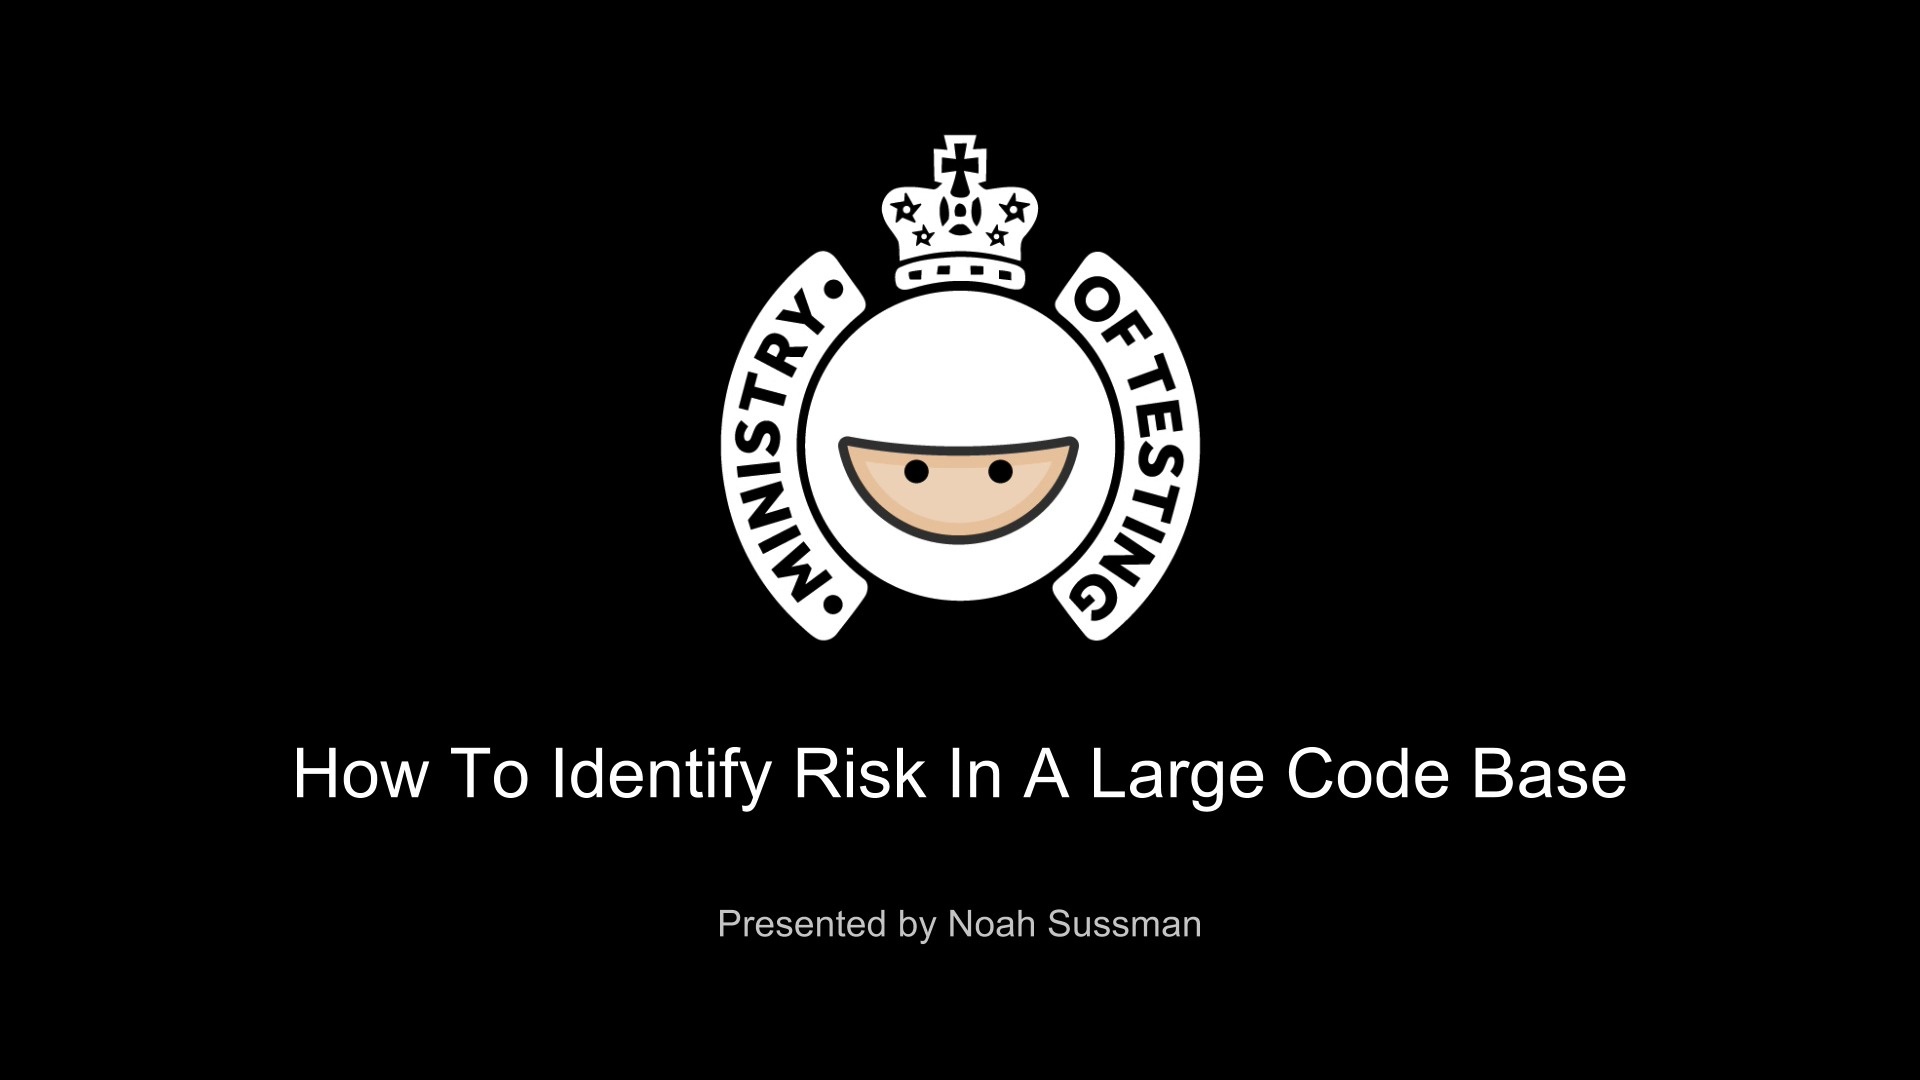 How to Identify Risk in a Large Code Base